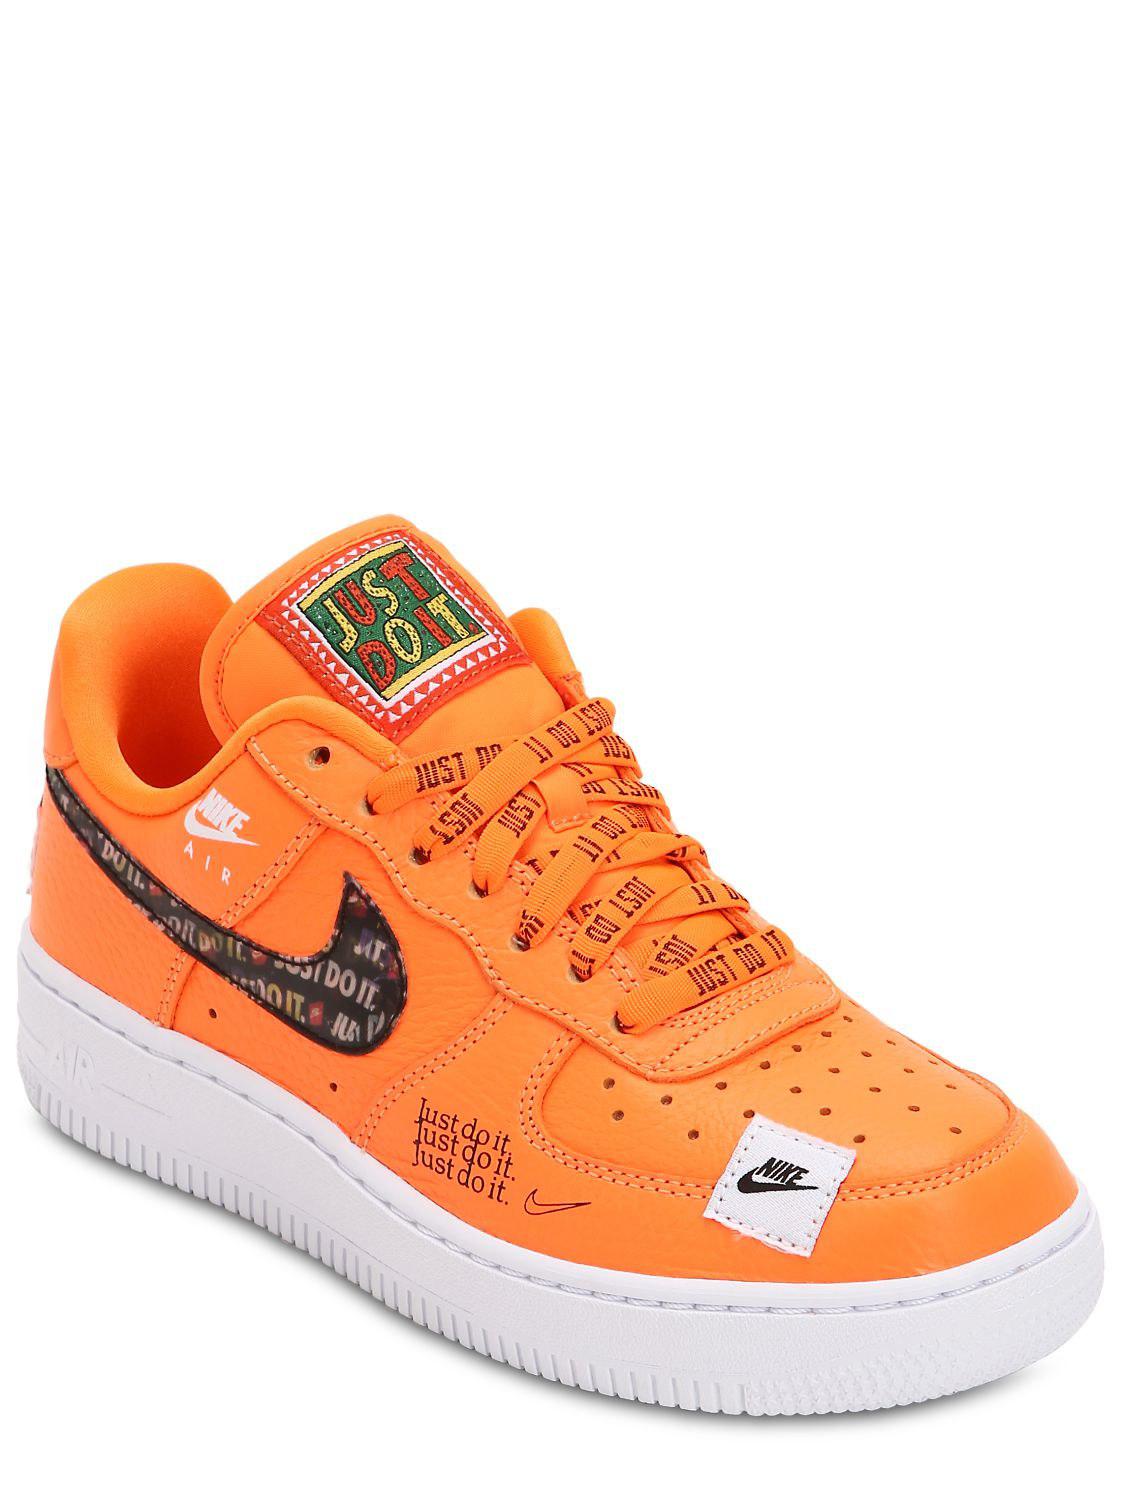 Air Force 1 Just Do It Orange - Airforce Military